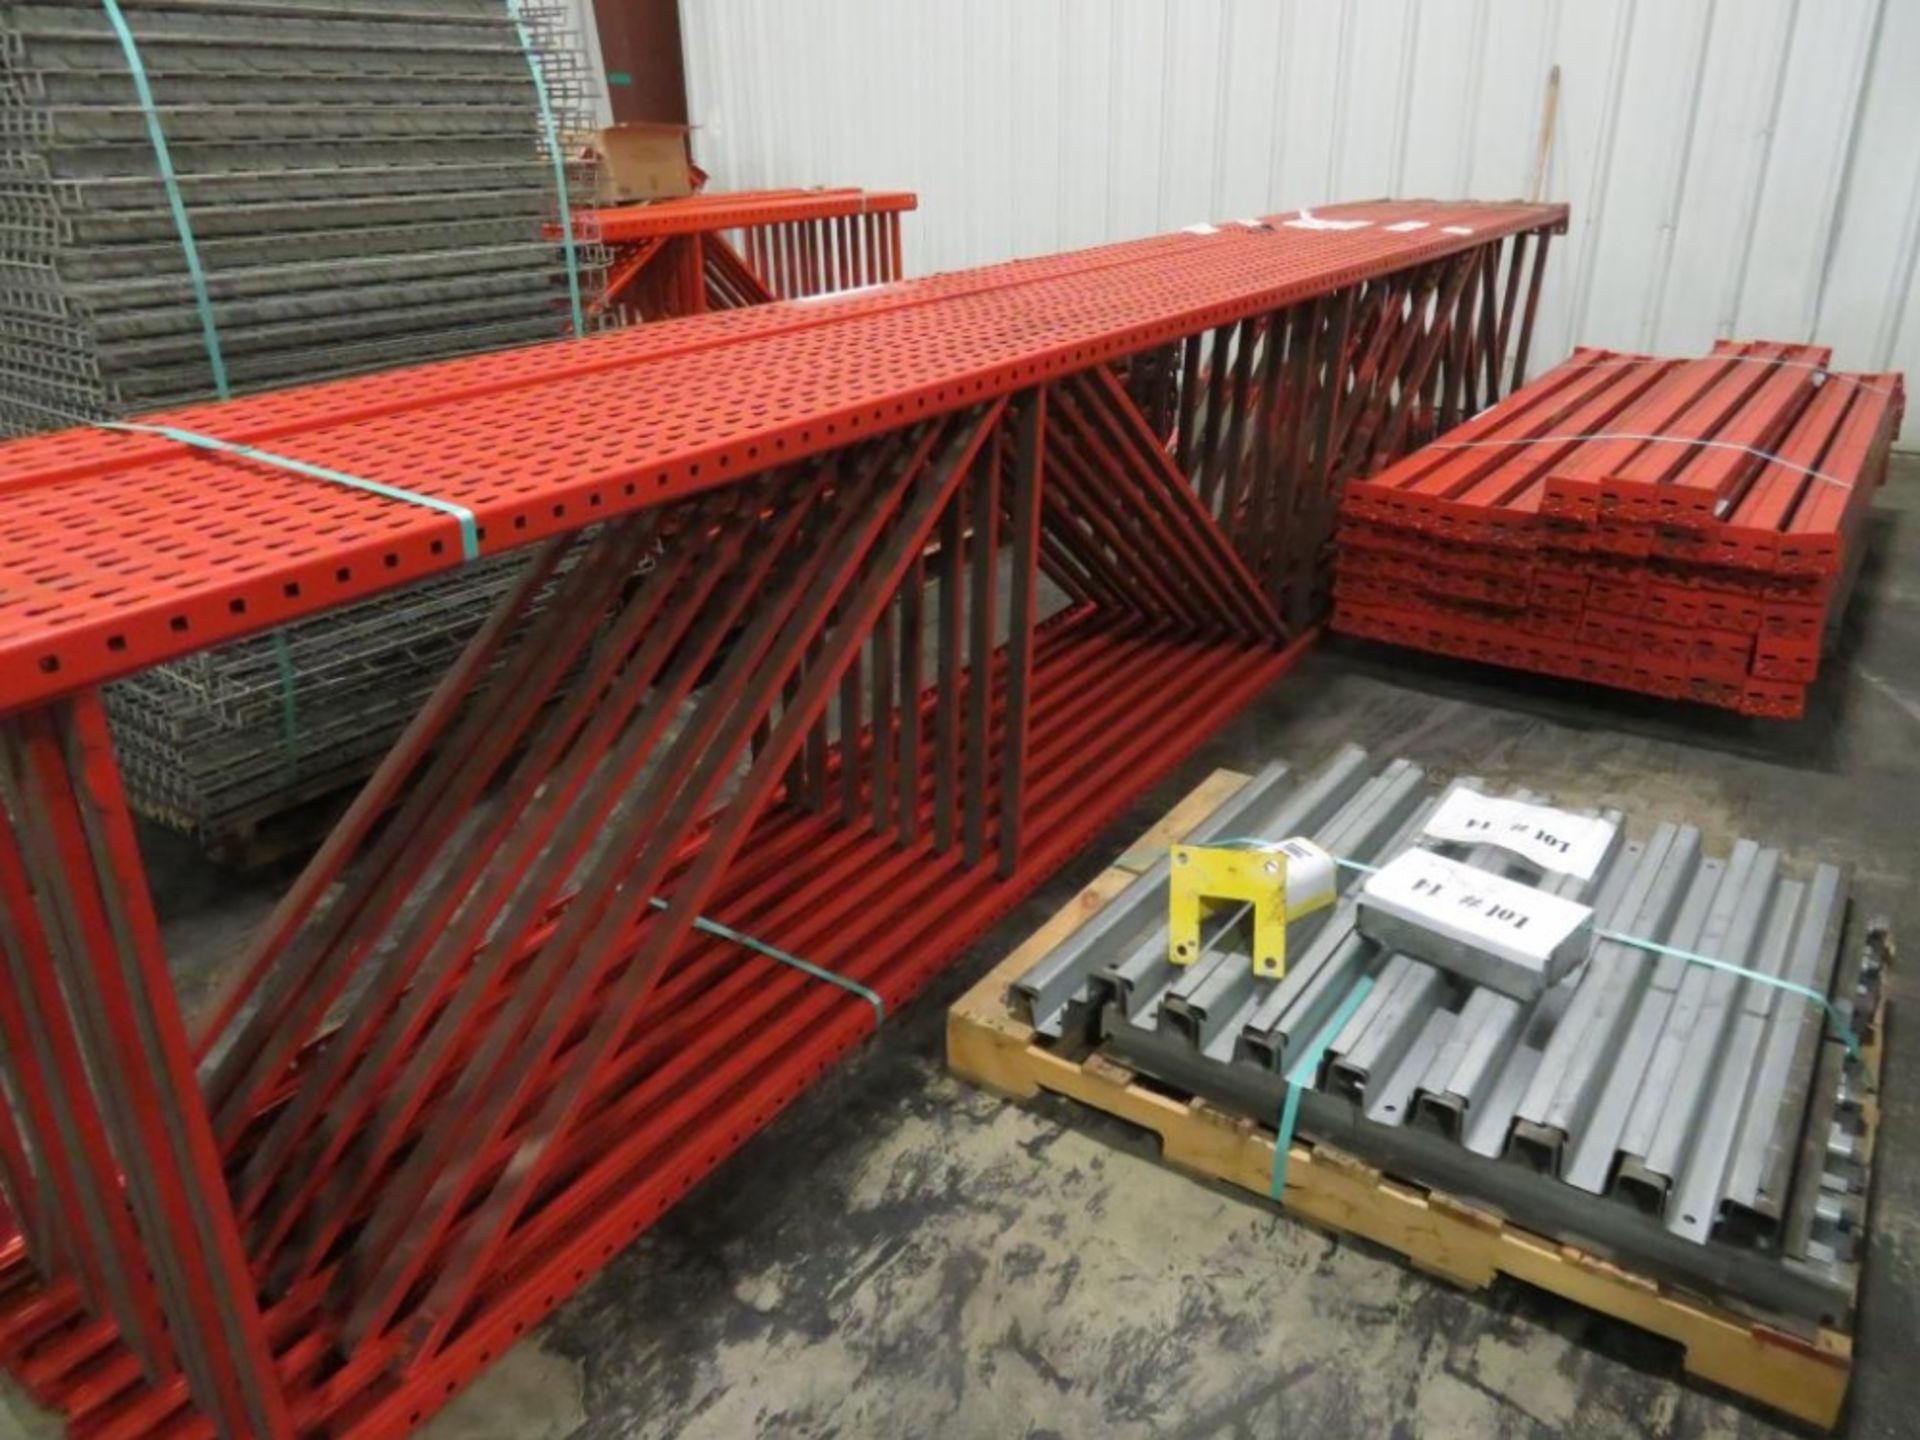 Paltier Pallet Racking 9 uprights 3"x 2 1/4", 42" wide and 18' tall, 48 beams 4 1/8" x 2 3/4" & 8'